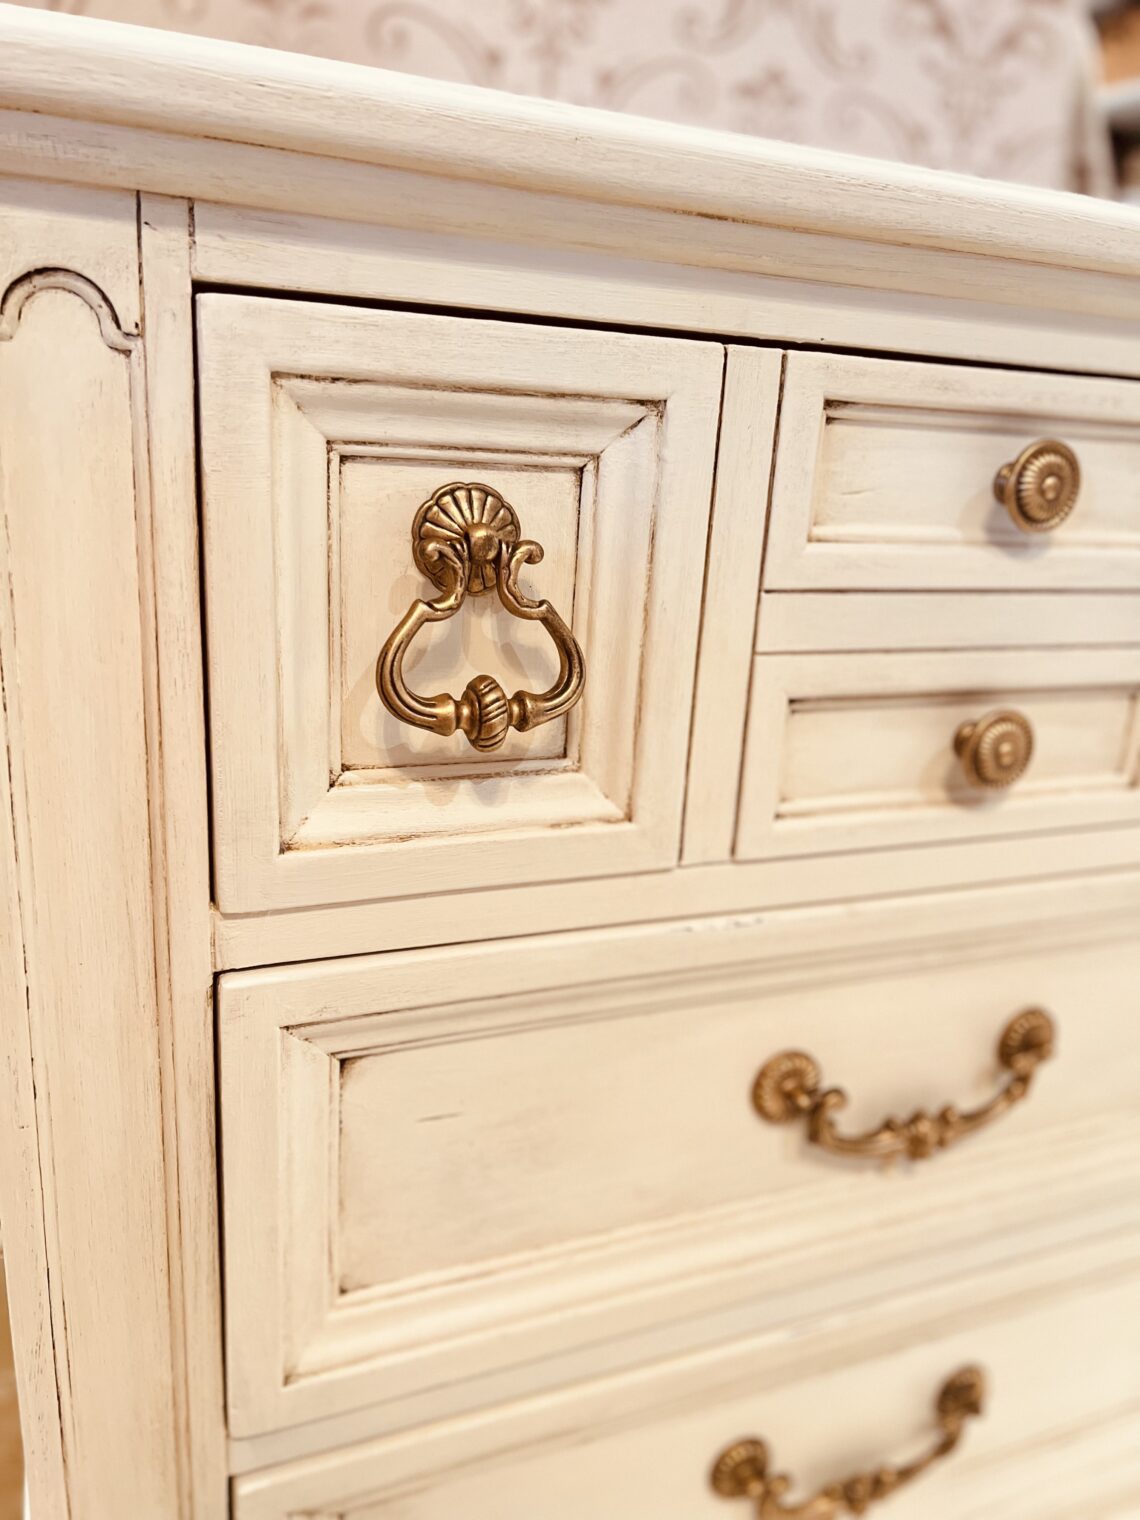 French country bedroom furniture makeover dark antique walnut wrought iron accents home décor improvement chalk paint all in one wax glaze antique restoration before and after Provincial white cream gilding wax gold techniques tips rae dunn cinderella